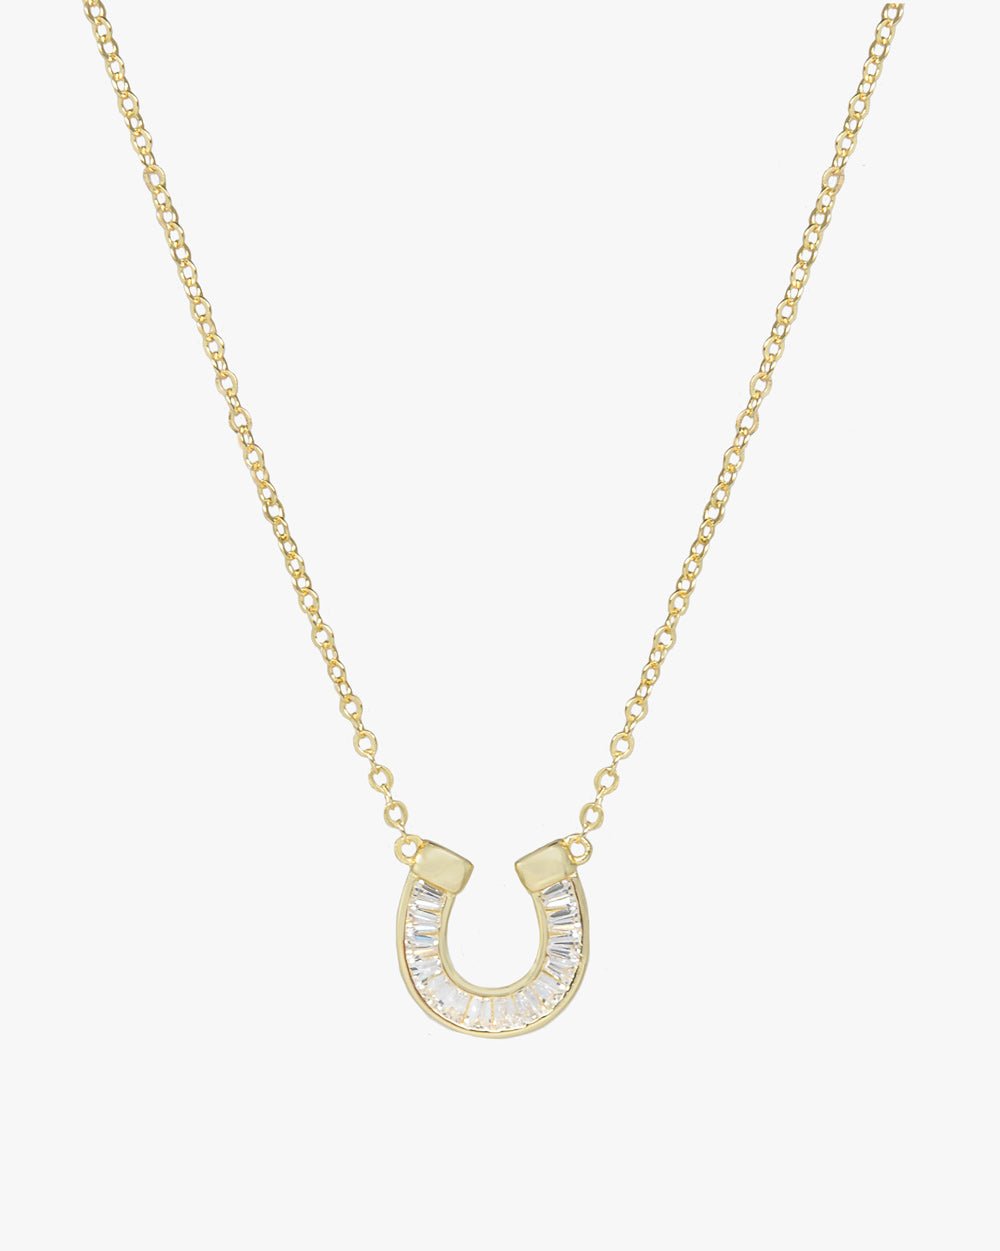 ROSLYN HORSESHOE PENDANT - Shop Cupcakes and Cashmere